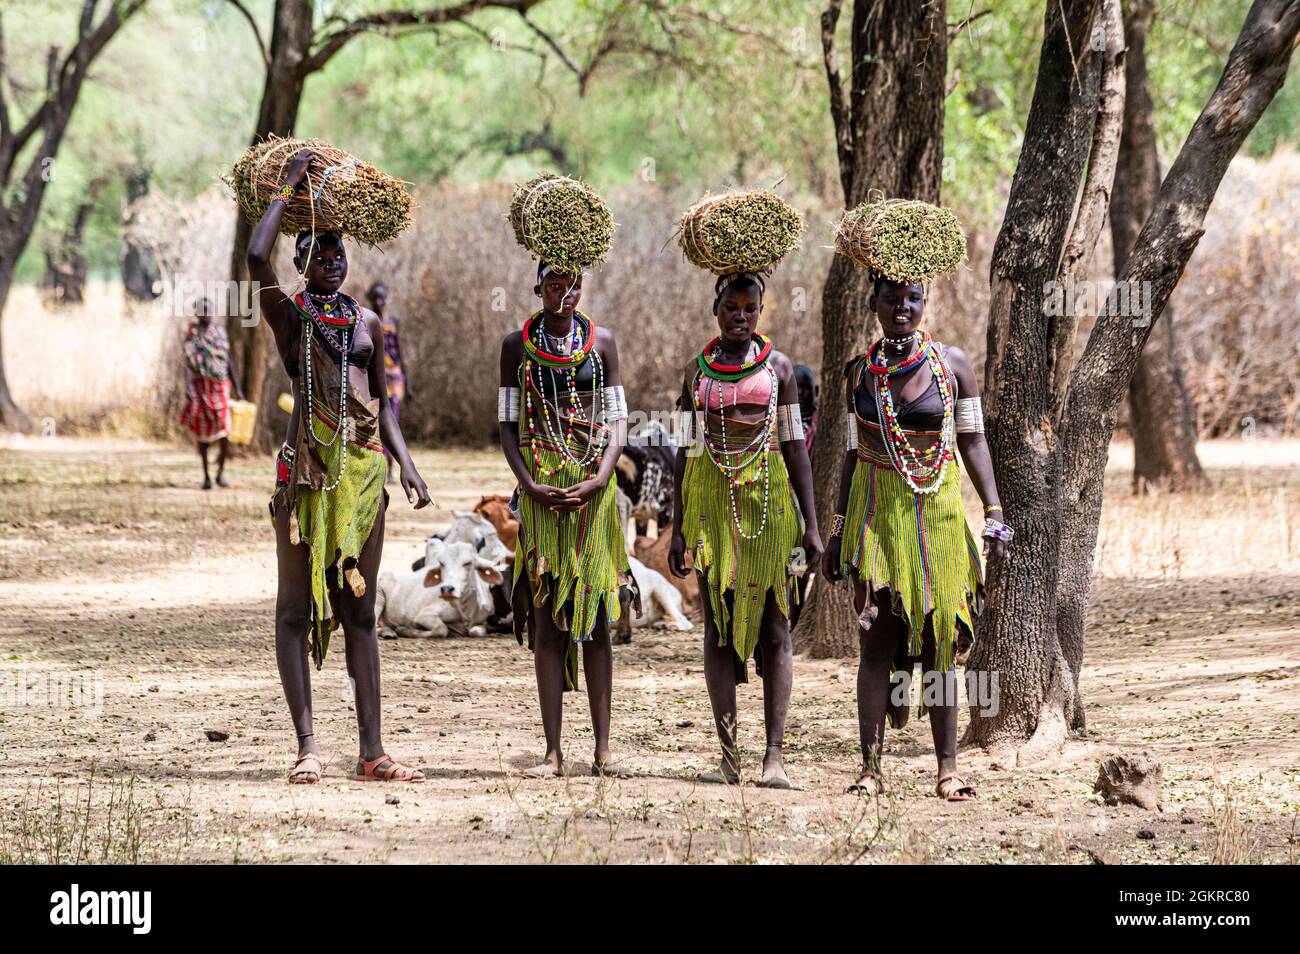 Girls with collected reeds on their heads on their way home, Toposa tribe, Eastern Equatoria, South Sudan, Africa Stock Photo